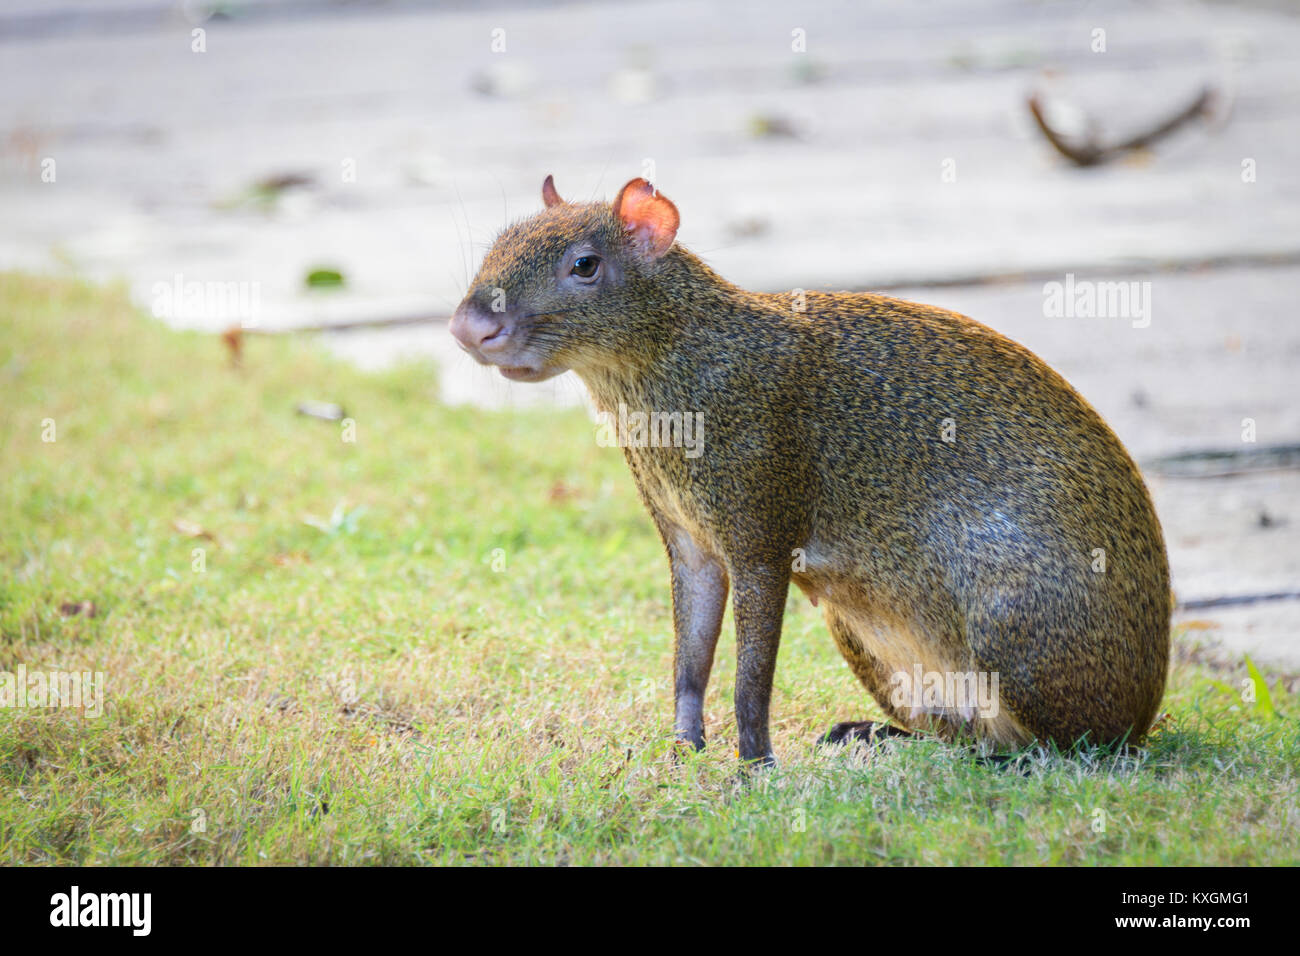 Agouti agoutis or Sereque rodent sitting on the grass. Rodents of the Caribbean. Copy space Stock Photo